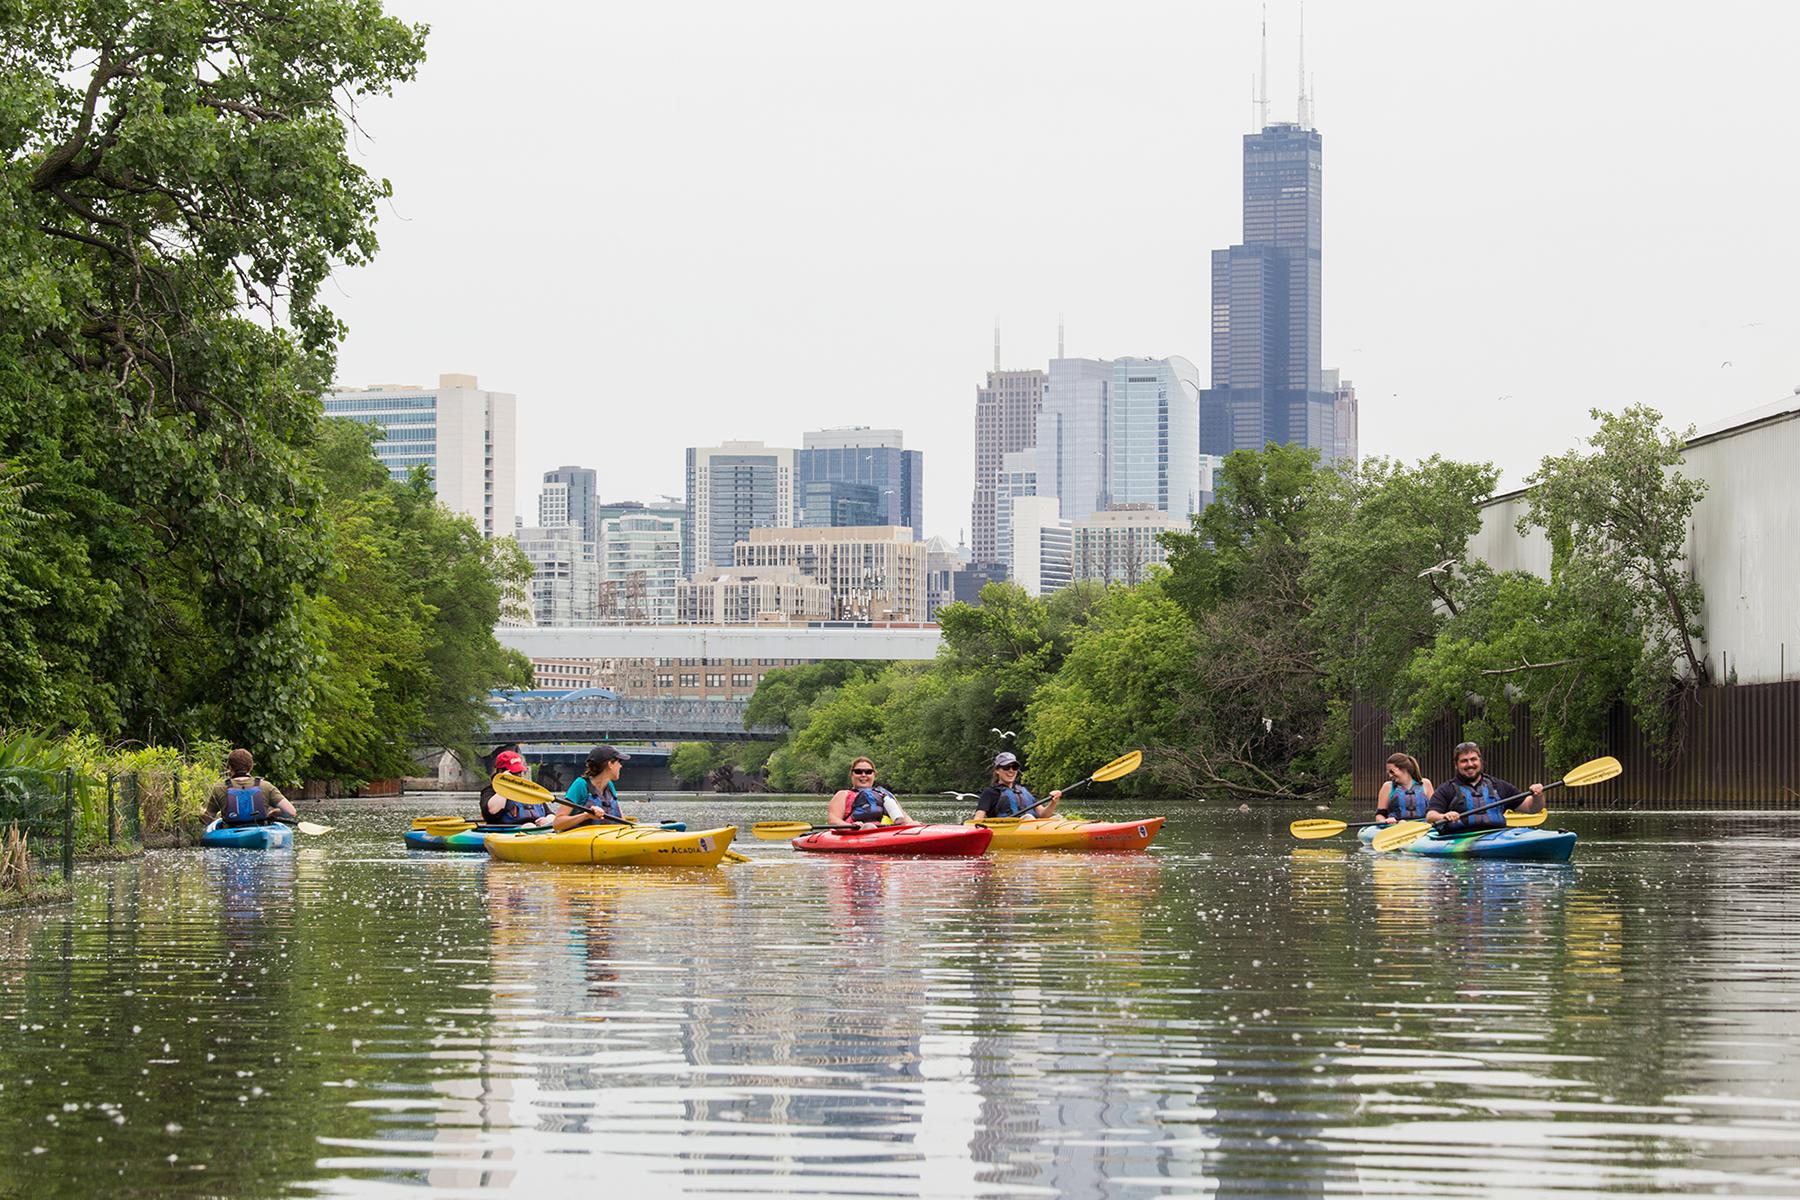 Shedd Aquarium's new Kayak for Conservation program aims to introduce residents to the Chicago River ecosystem and the wildlife that call the waters home. (Hilary Wind / Shedd Aquarium)